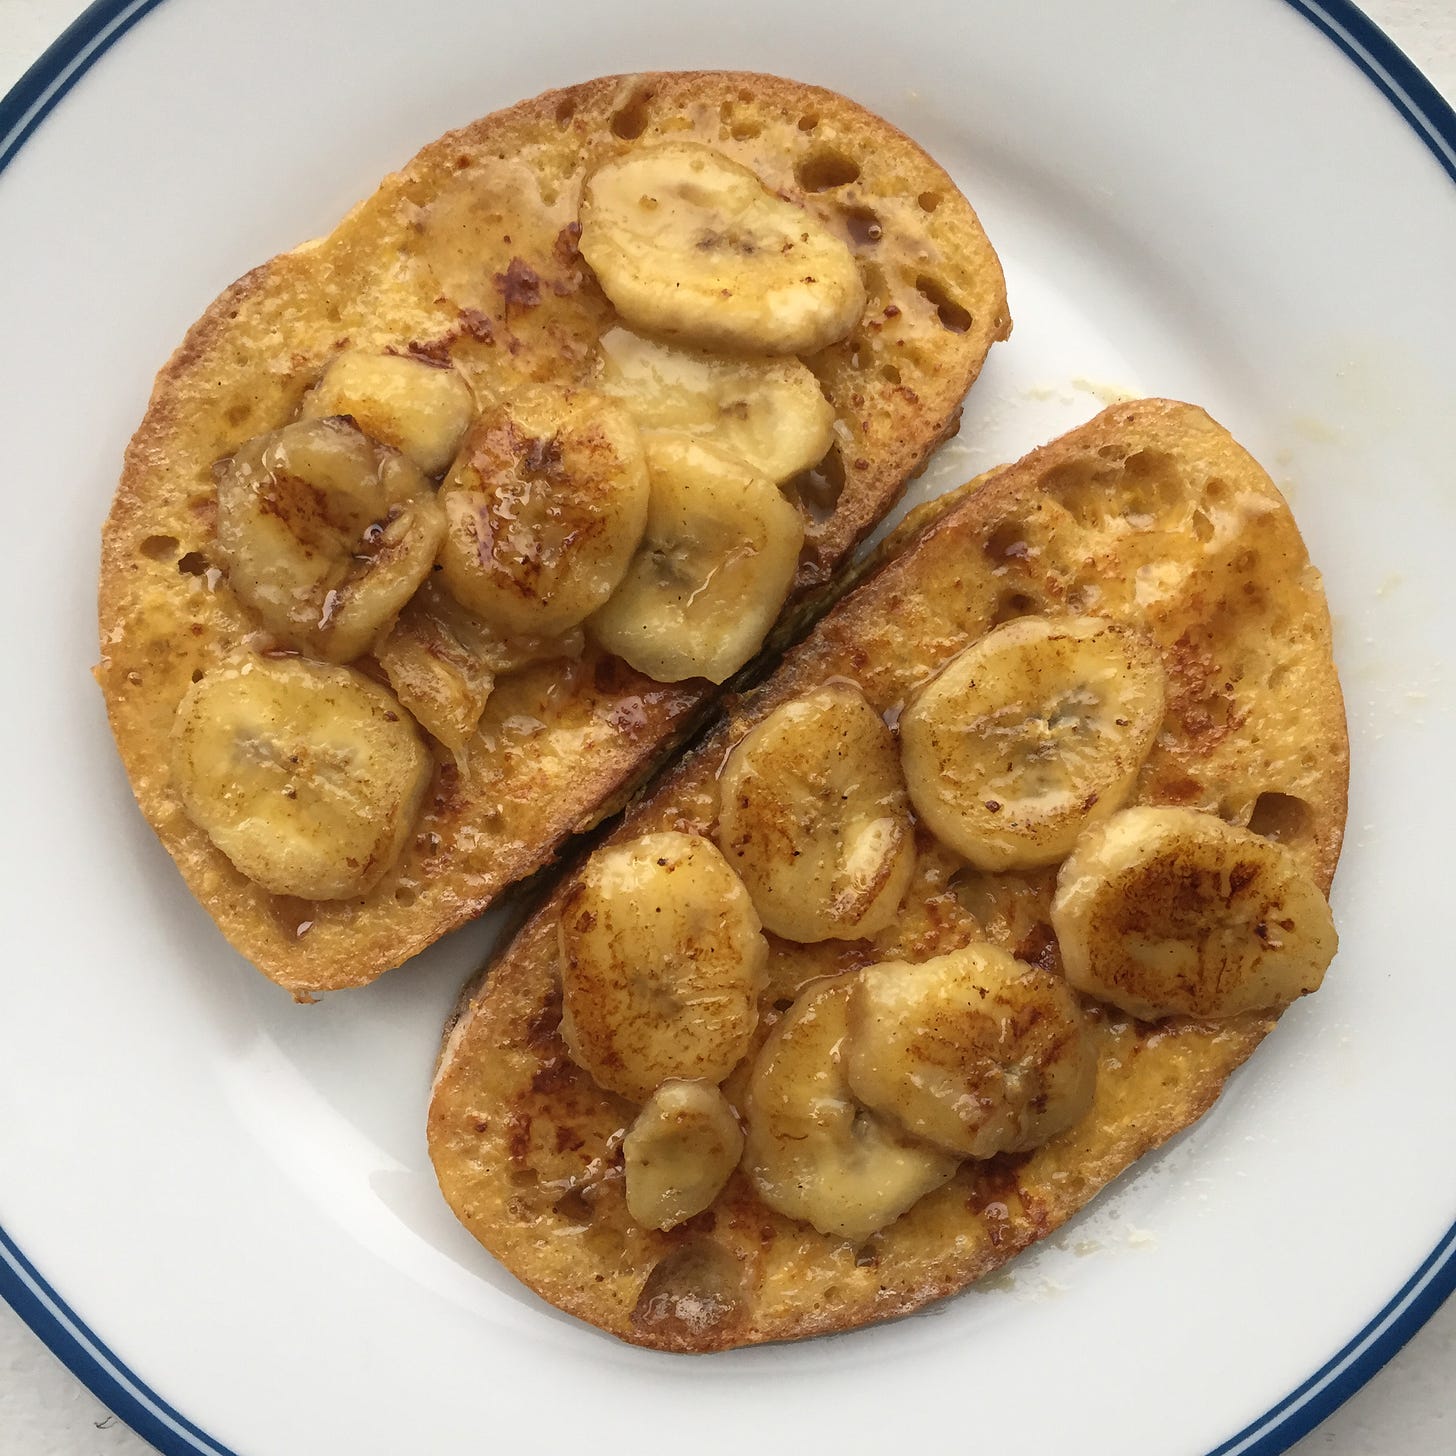 Two slices of French toast covered in syrup and bananas, on a white plate.